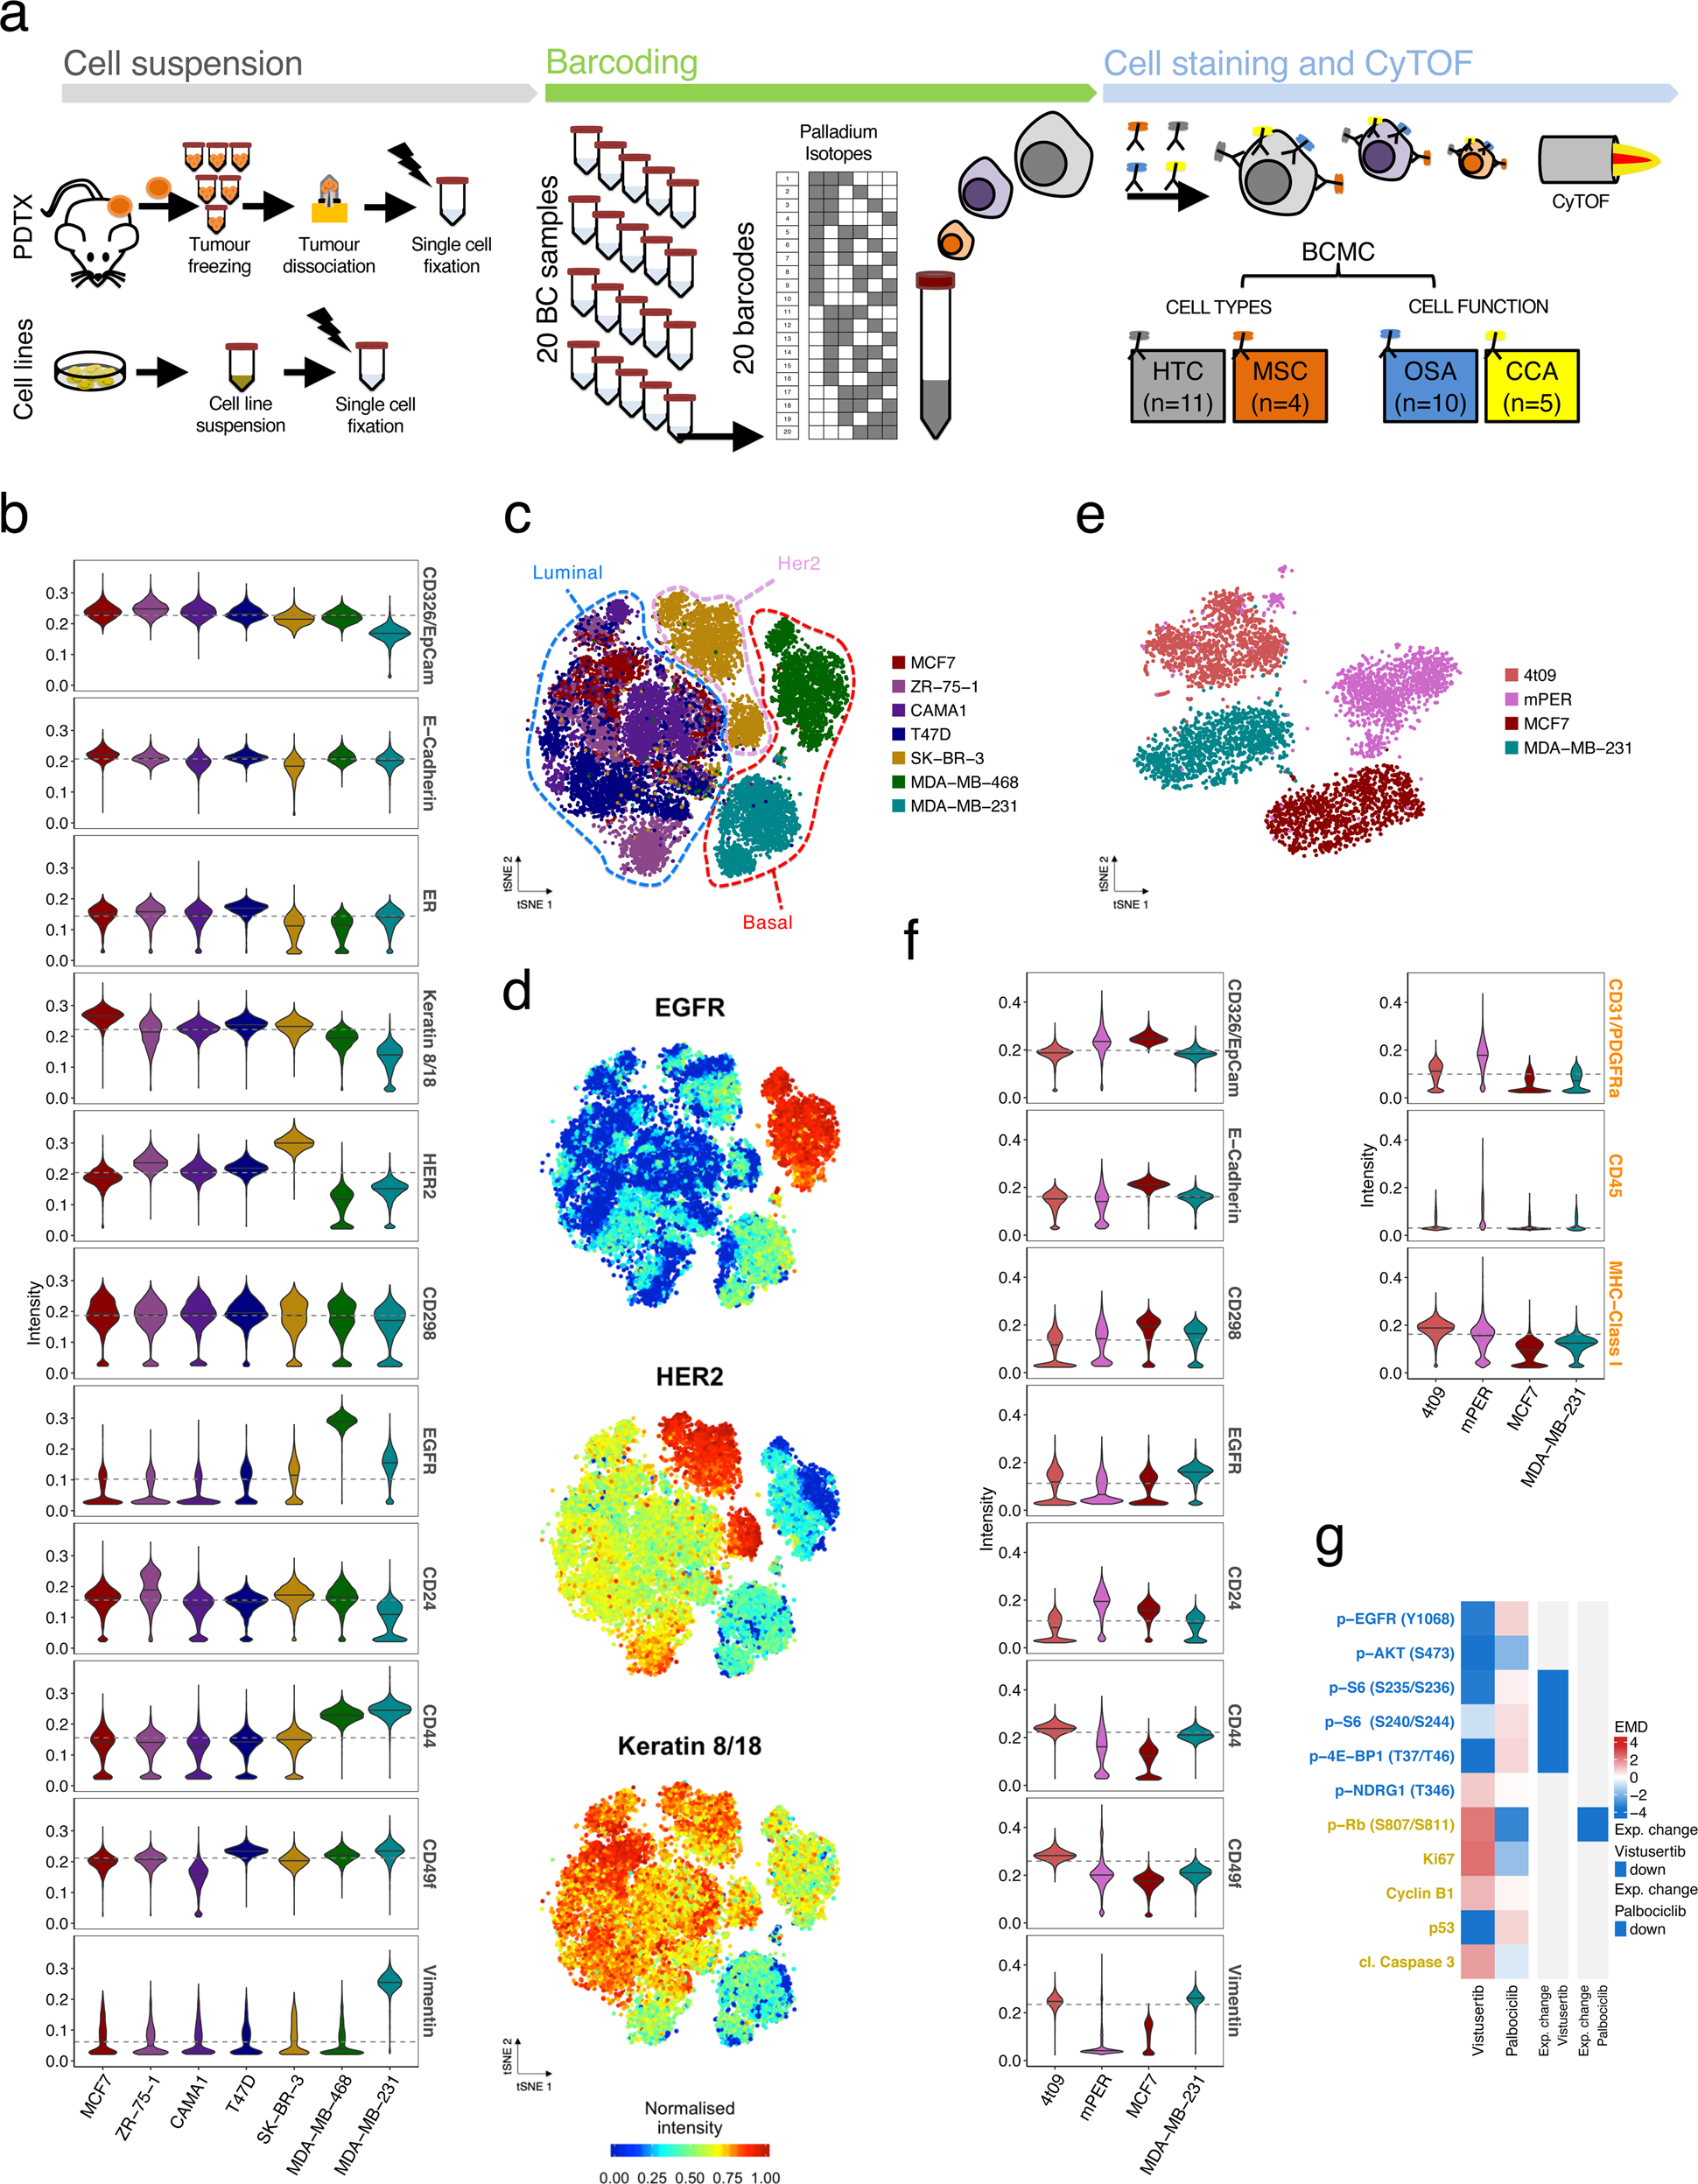 Landscapes of cellular phenotypic diversity in breast cancer xenografts and their impact drug response |